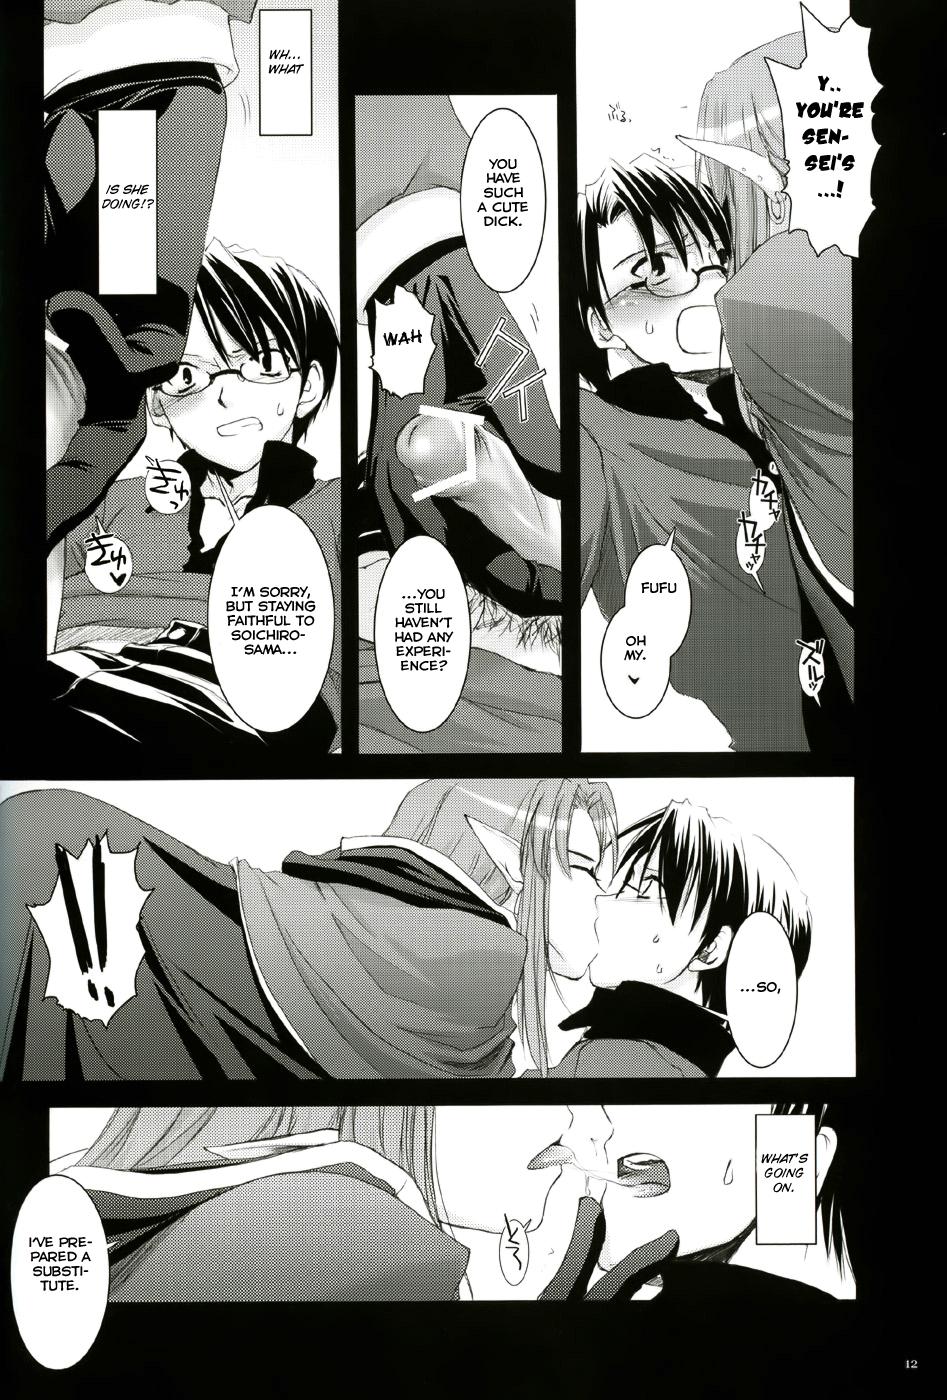 Fucked D.L. action 27 - Fate stay night Outdoor - Page 11